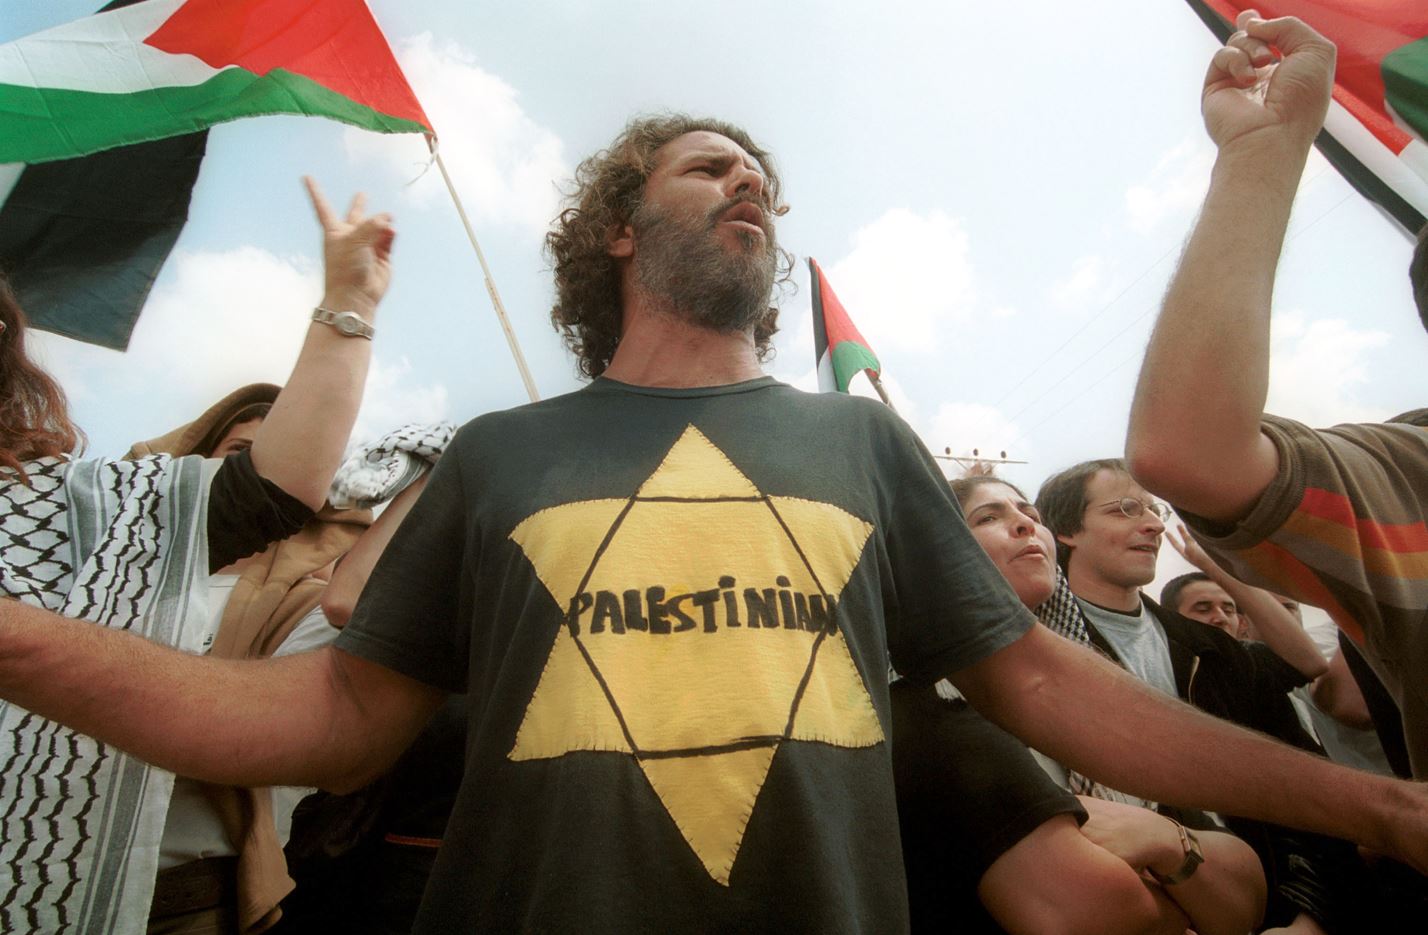 An man wears a yellow Star of David shirt with &#8220;Palestinian&#8221; written inside it while protesting at an Israeli checkpoint on April 9, 2002 near Jenin. Photo by Quique Kierszenbaum via Getty Images.
